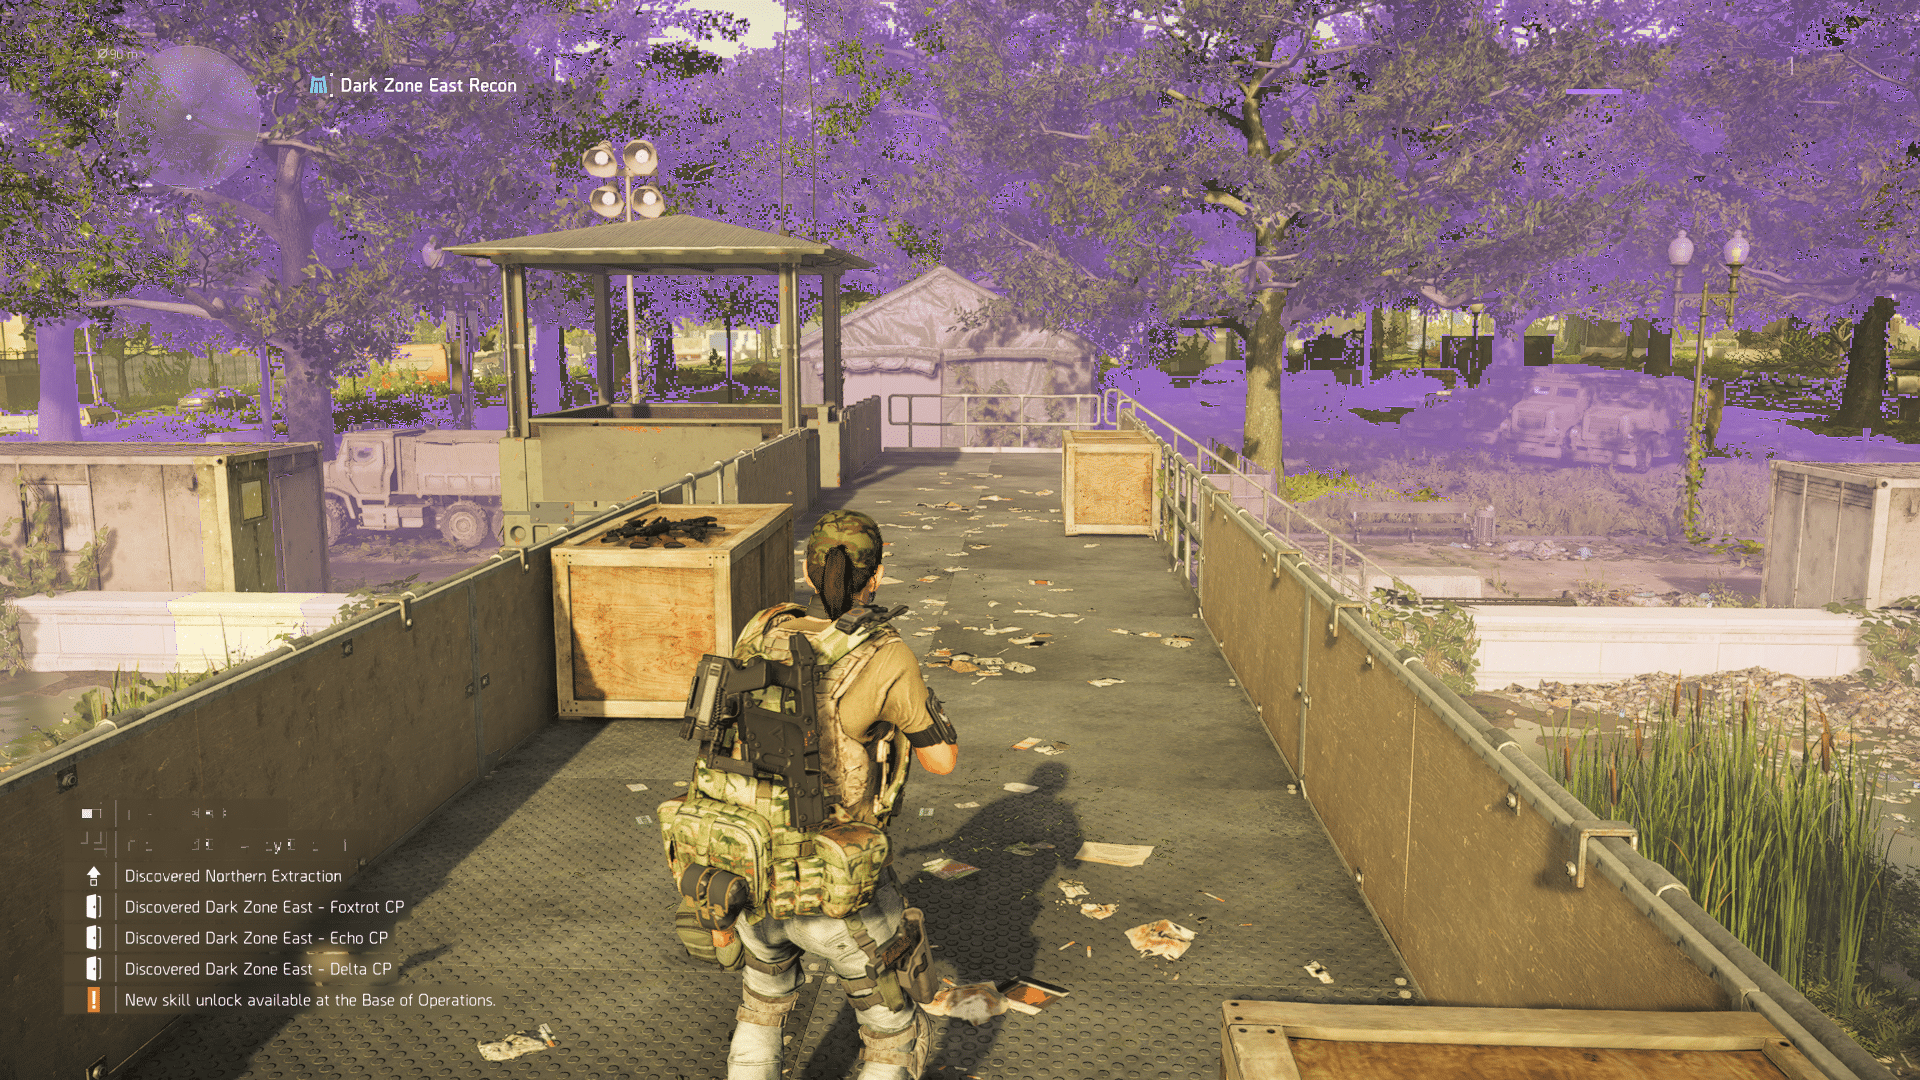 TheDivision2 4 1 2019 7 55 31 PM 216 1